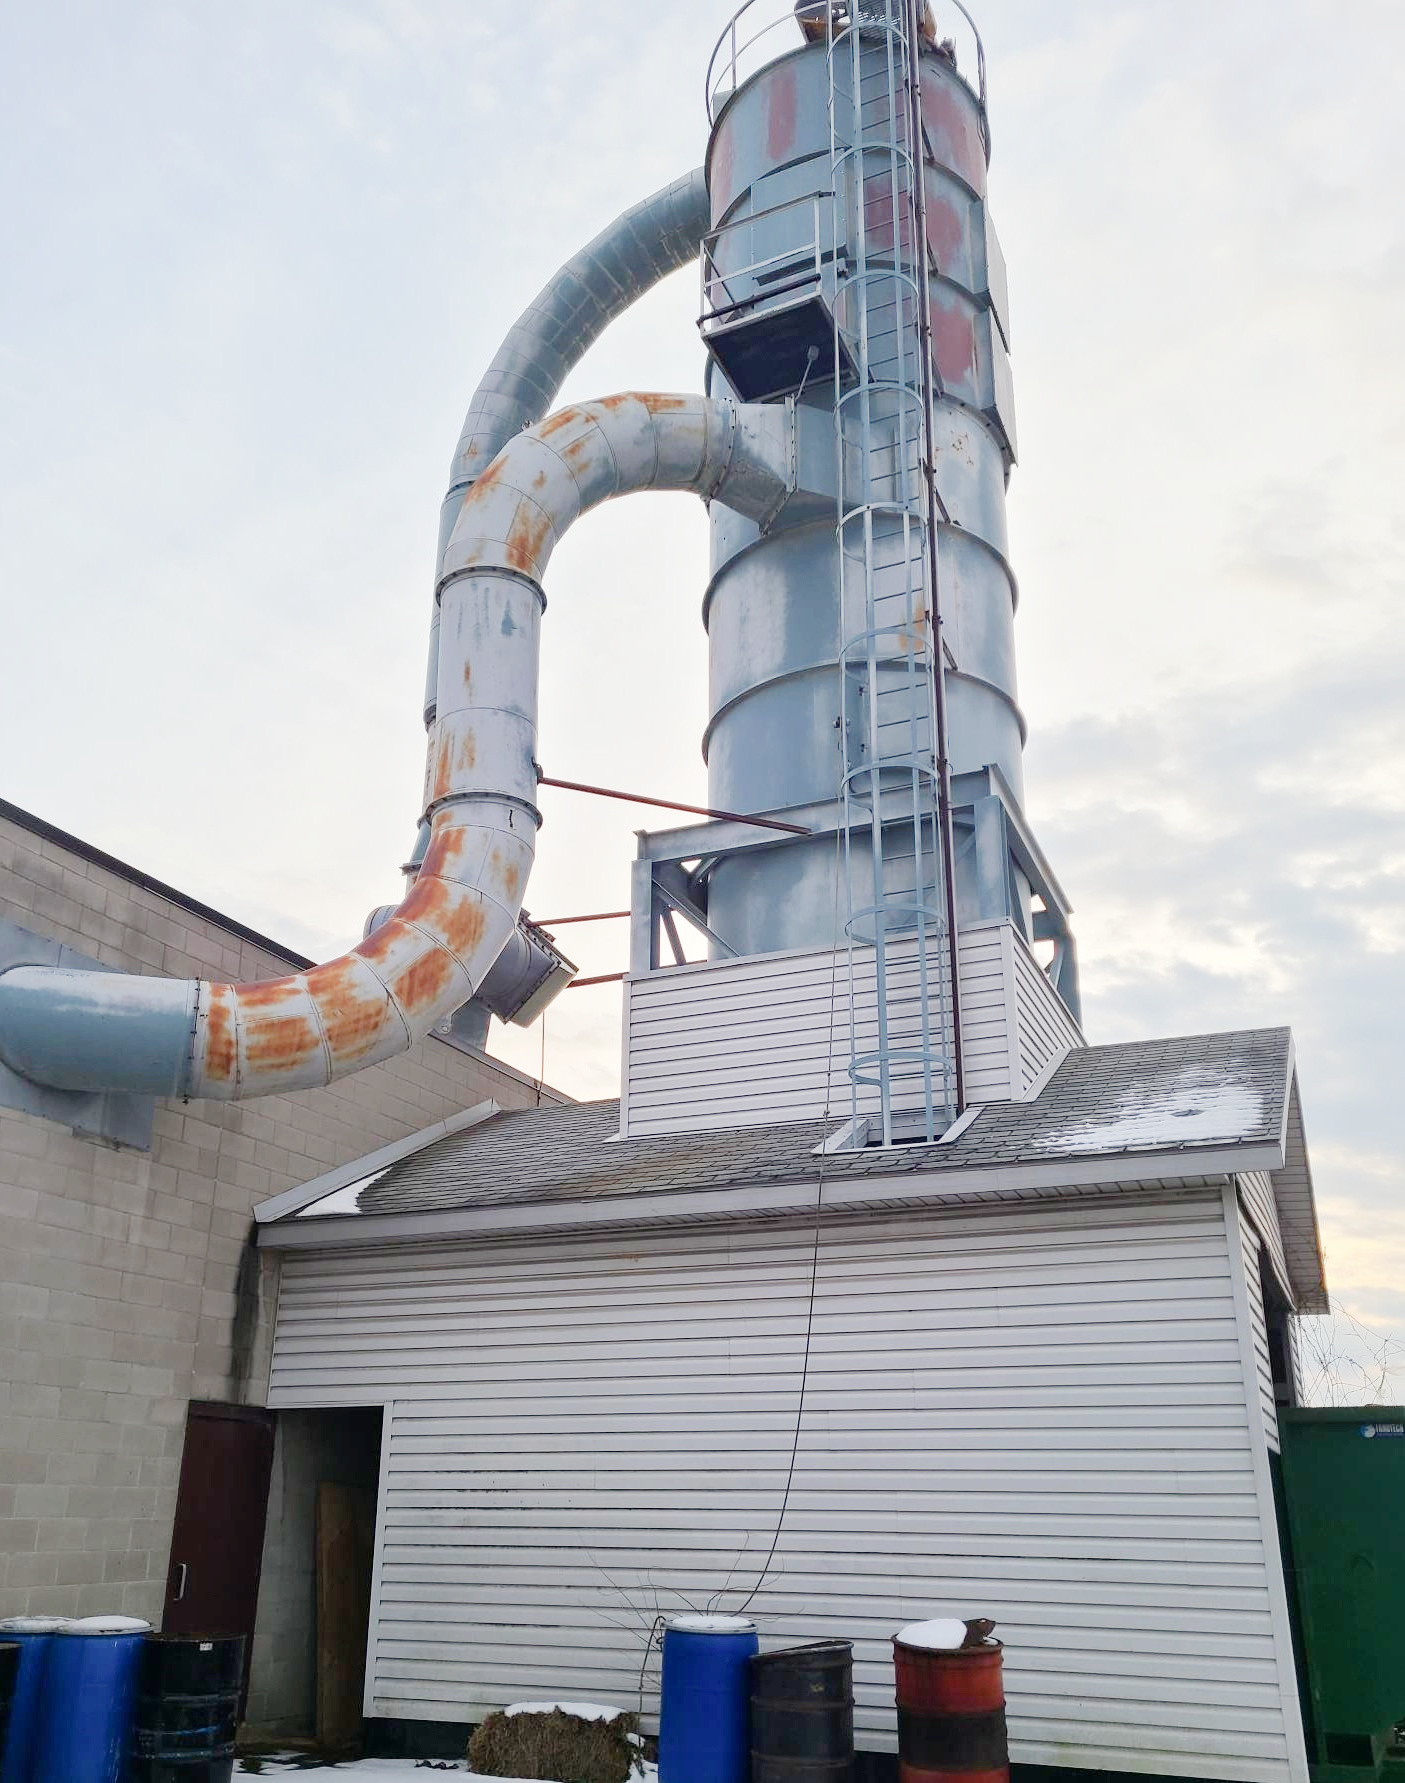 100 HP Outdoor Dust Collection System (used) Item # UE-052522F (Michigan)